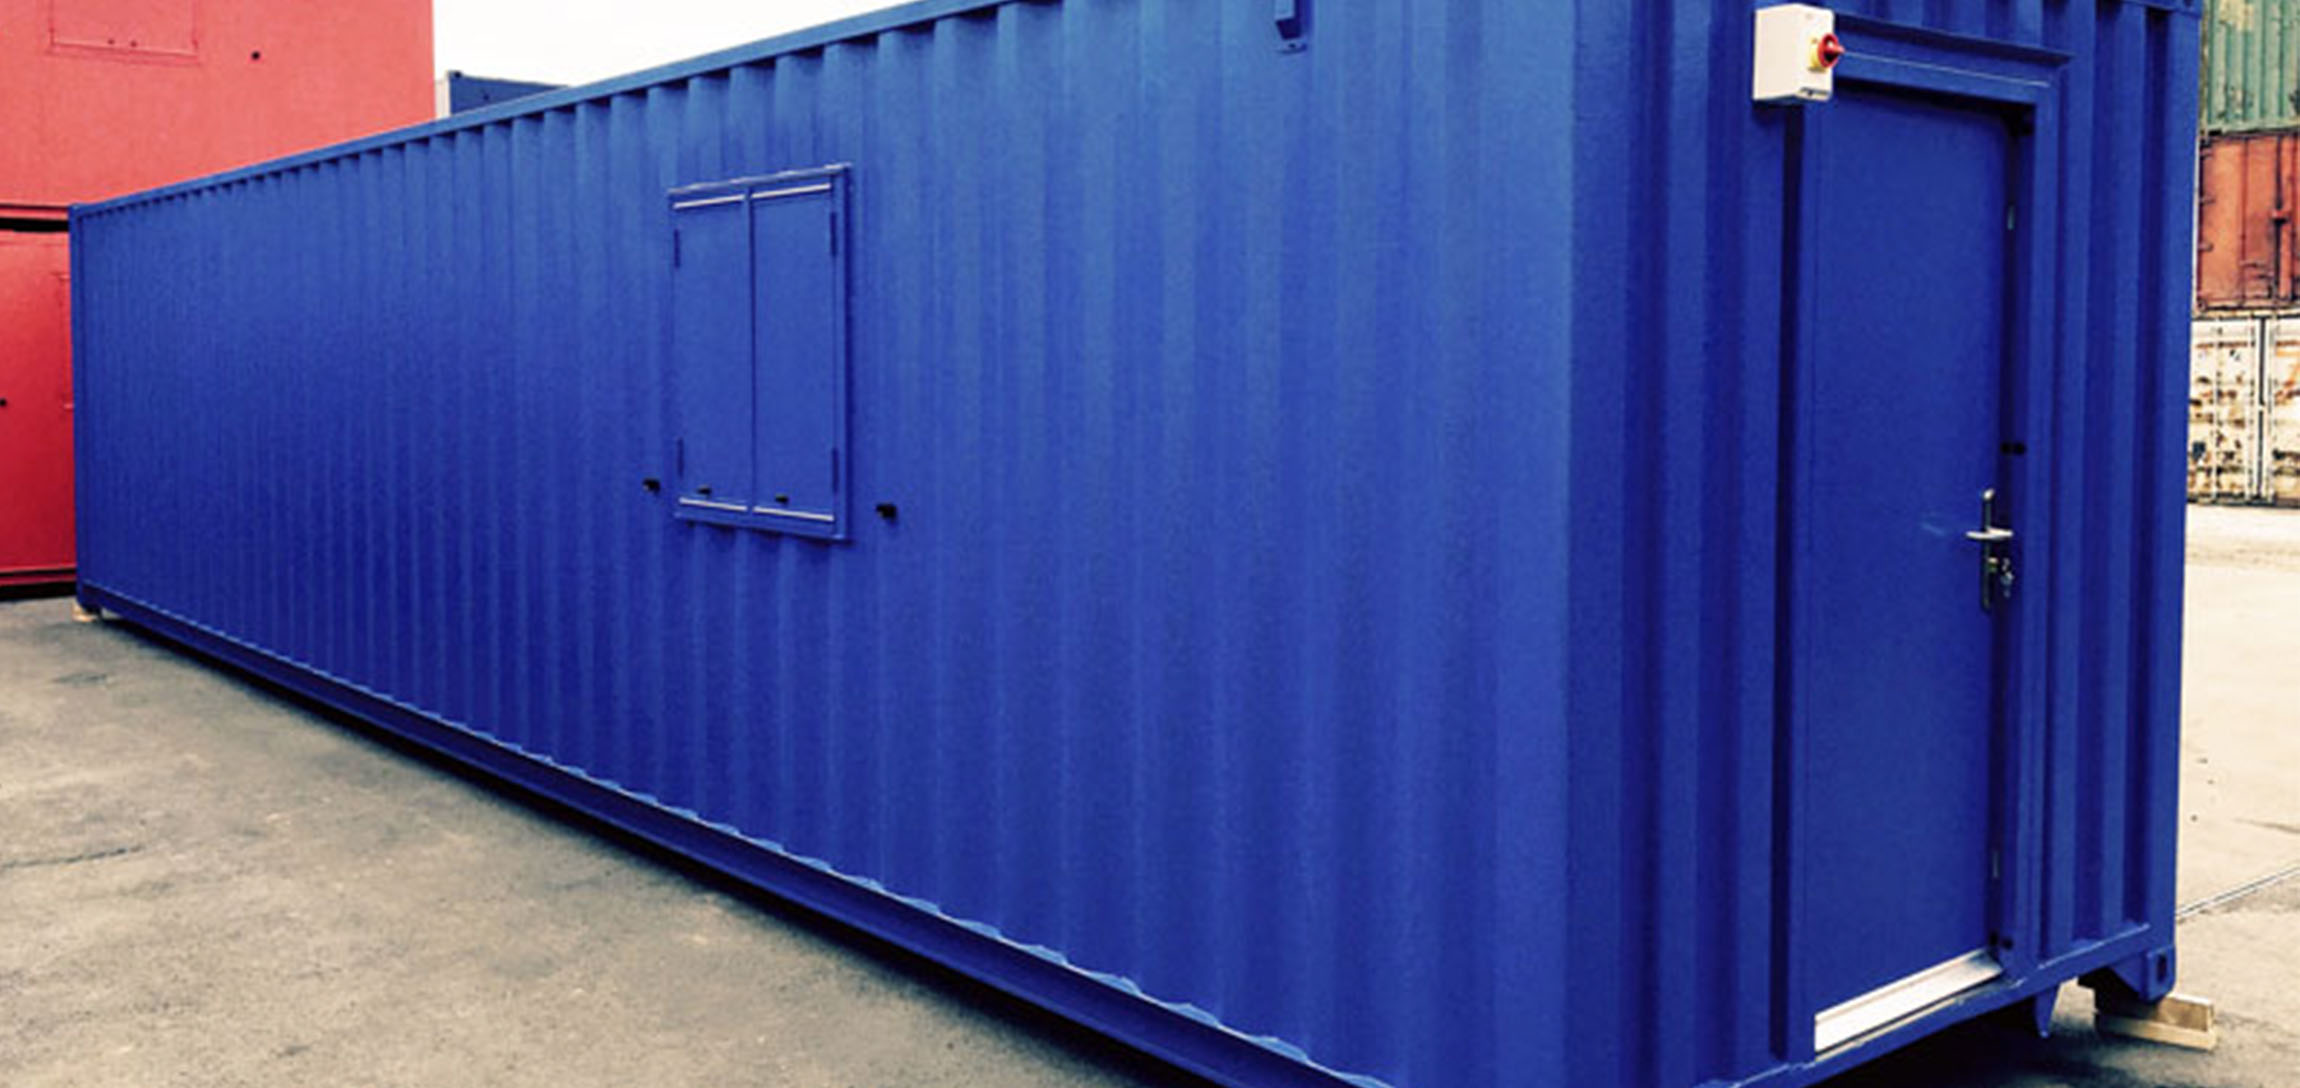 Providers of Bespoke Office Containers UK